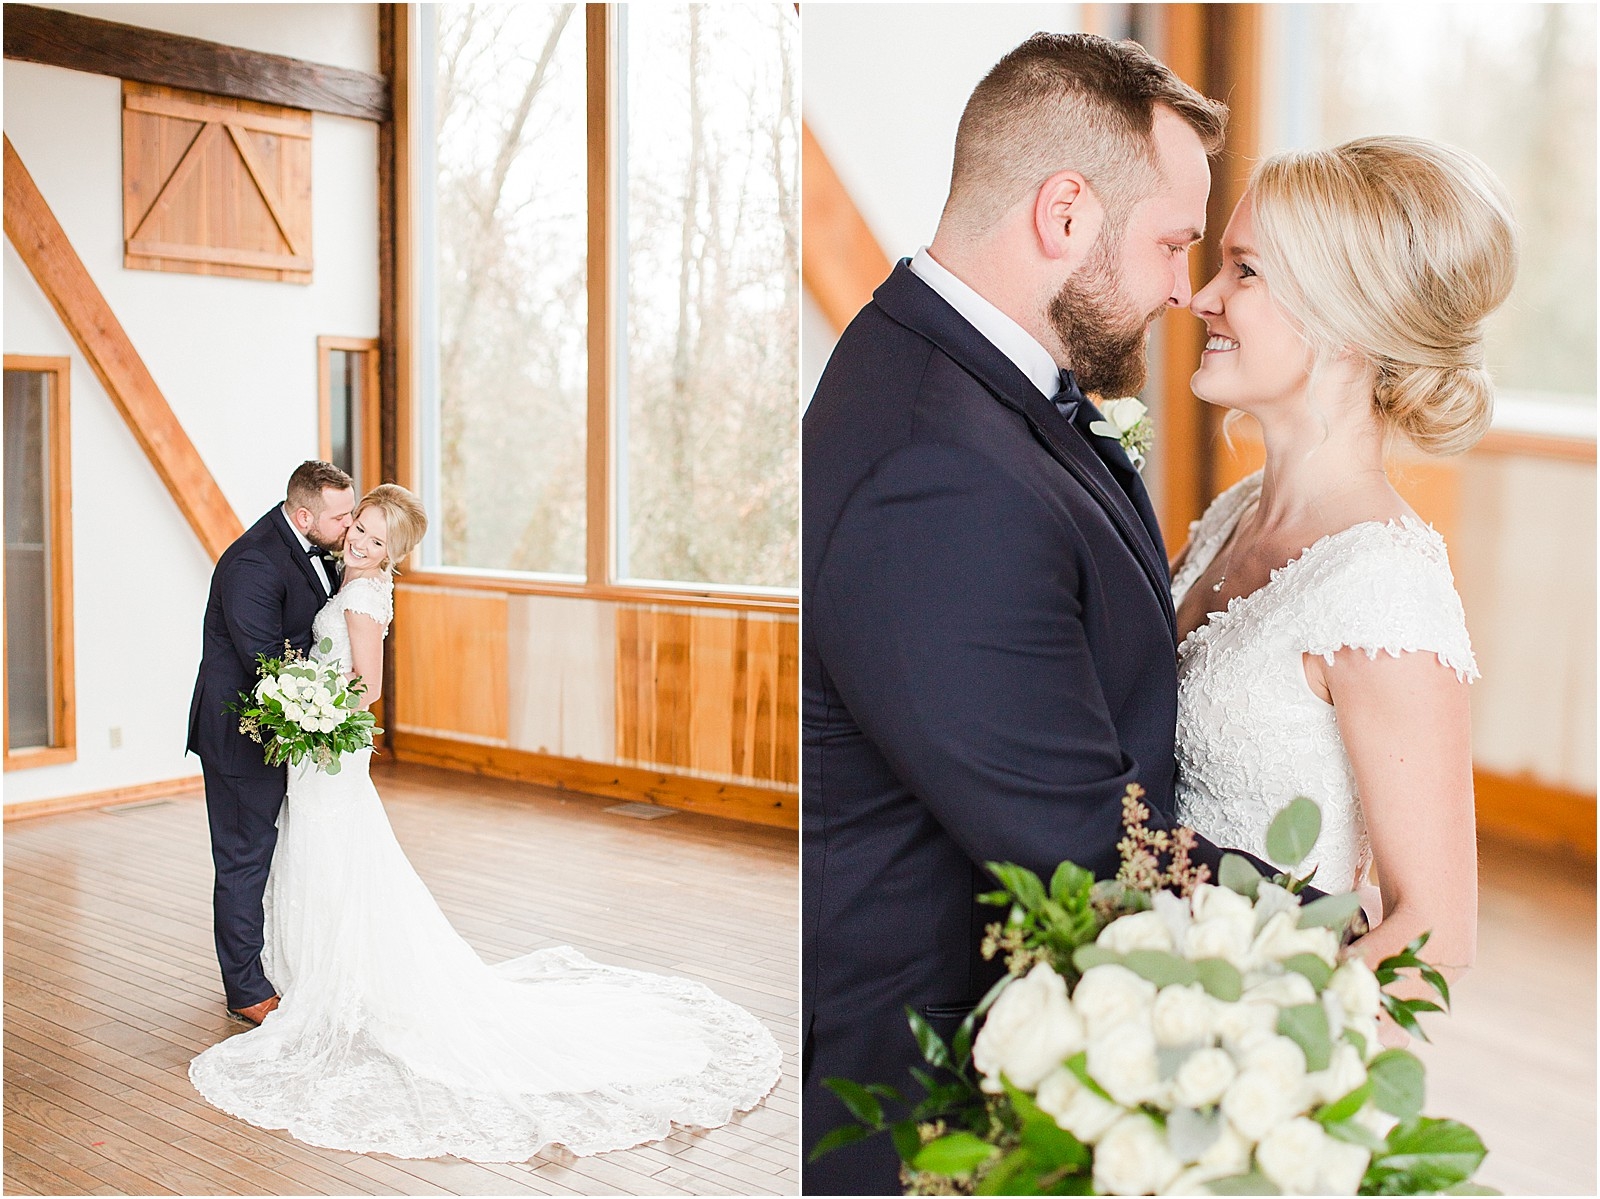 A Classic Winter Wedding in New Harmony | Rachel and Ryan | Bret and Brandie Photography 0096.jpg